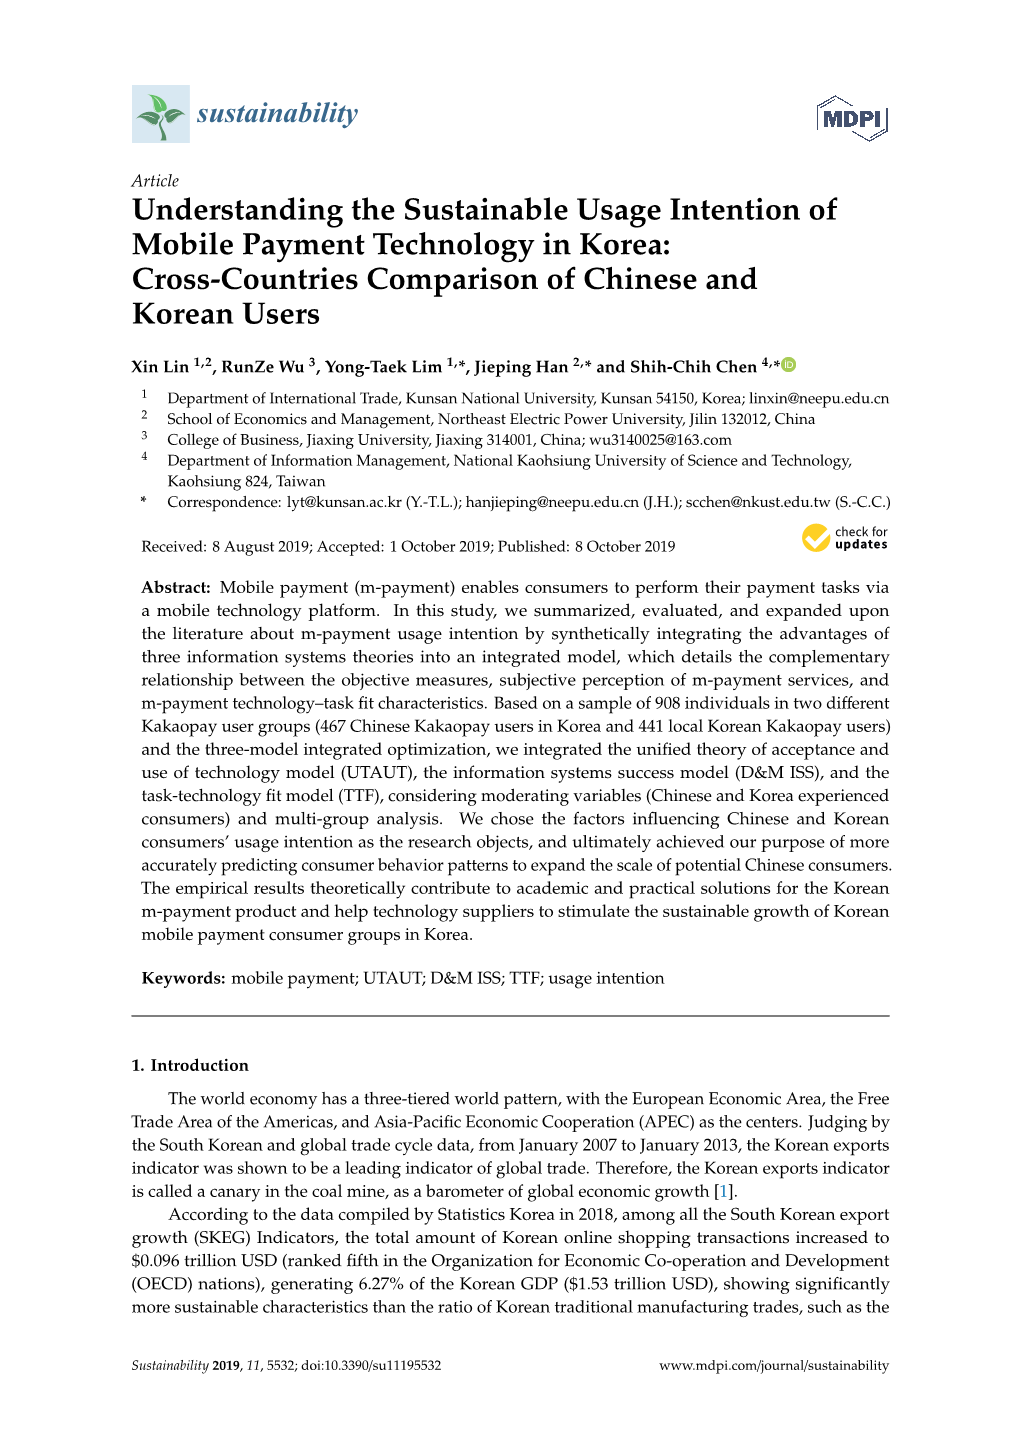 Understanding the Sustainable Usage Intention of Mobile Payment Technology in Korea: Cross-Countries Comparison of Chinese and Korean Users